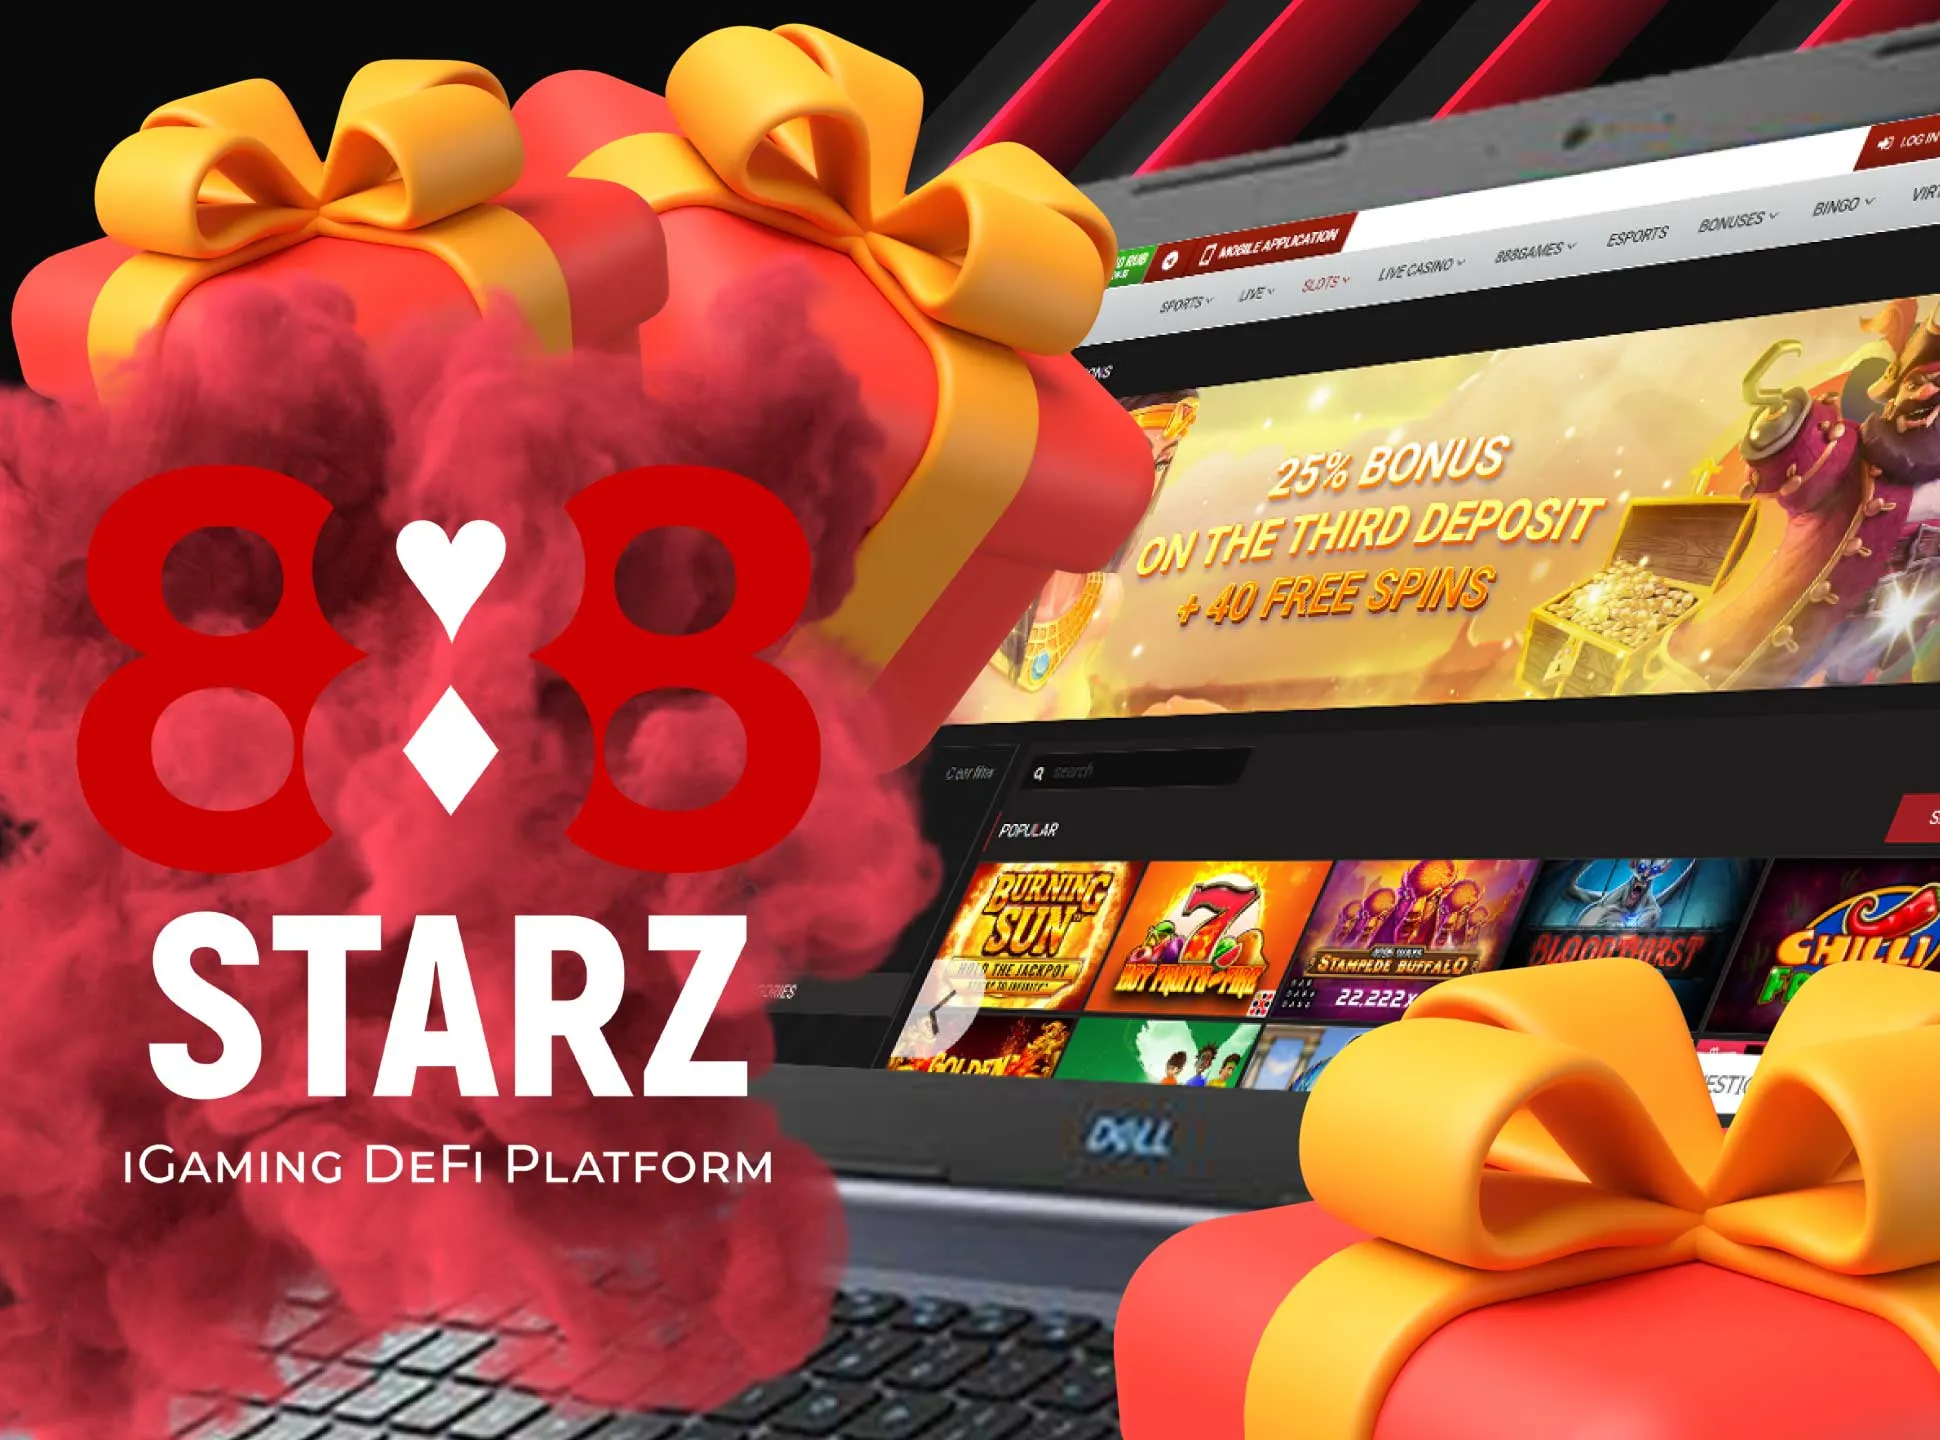 Casino bonus from 888starz gives you up to 140,000 BDT on casino games.